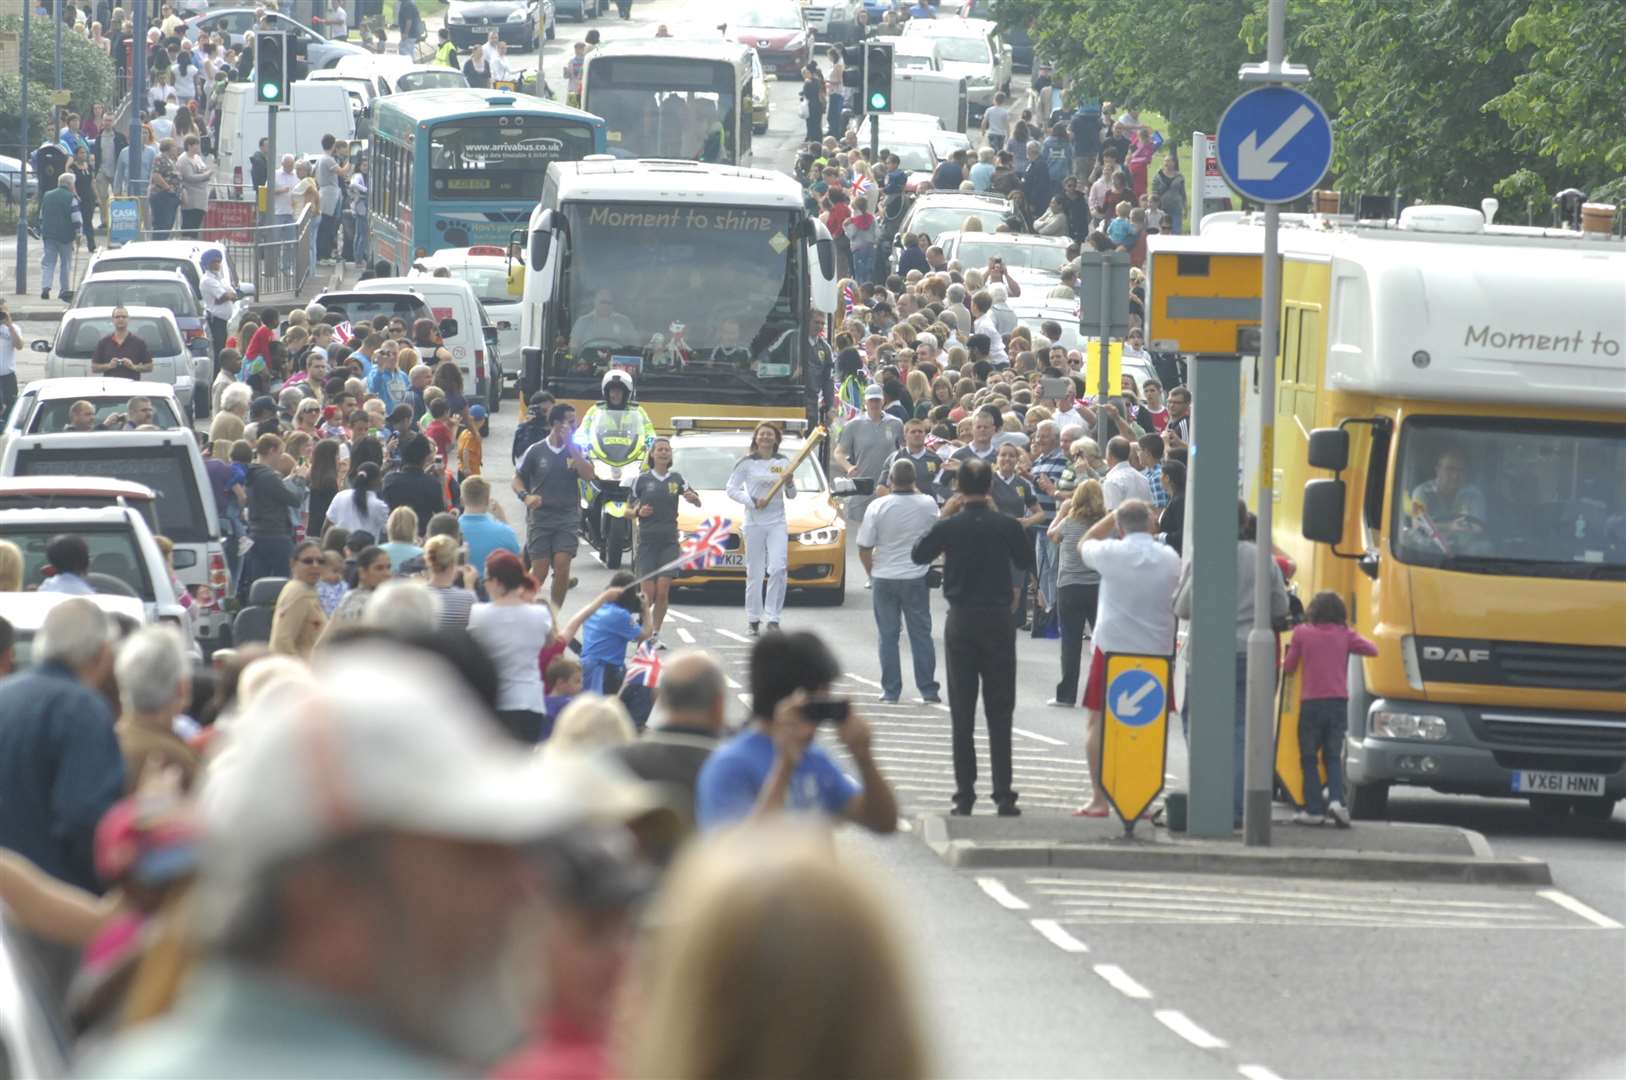 Thousands turned out to see the Olympic torch makes its way through Kent